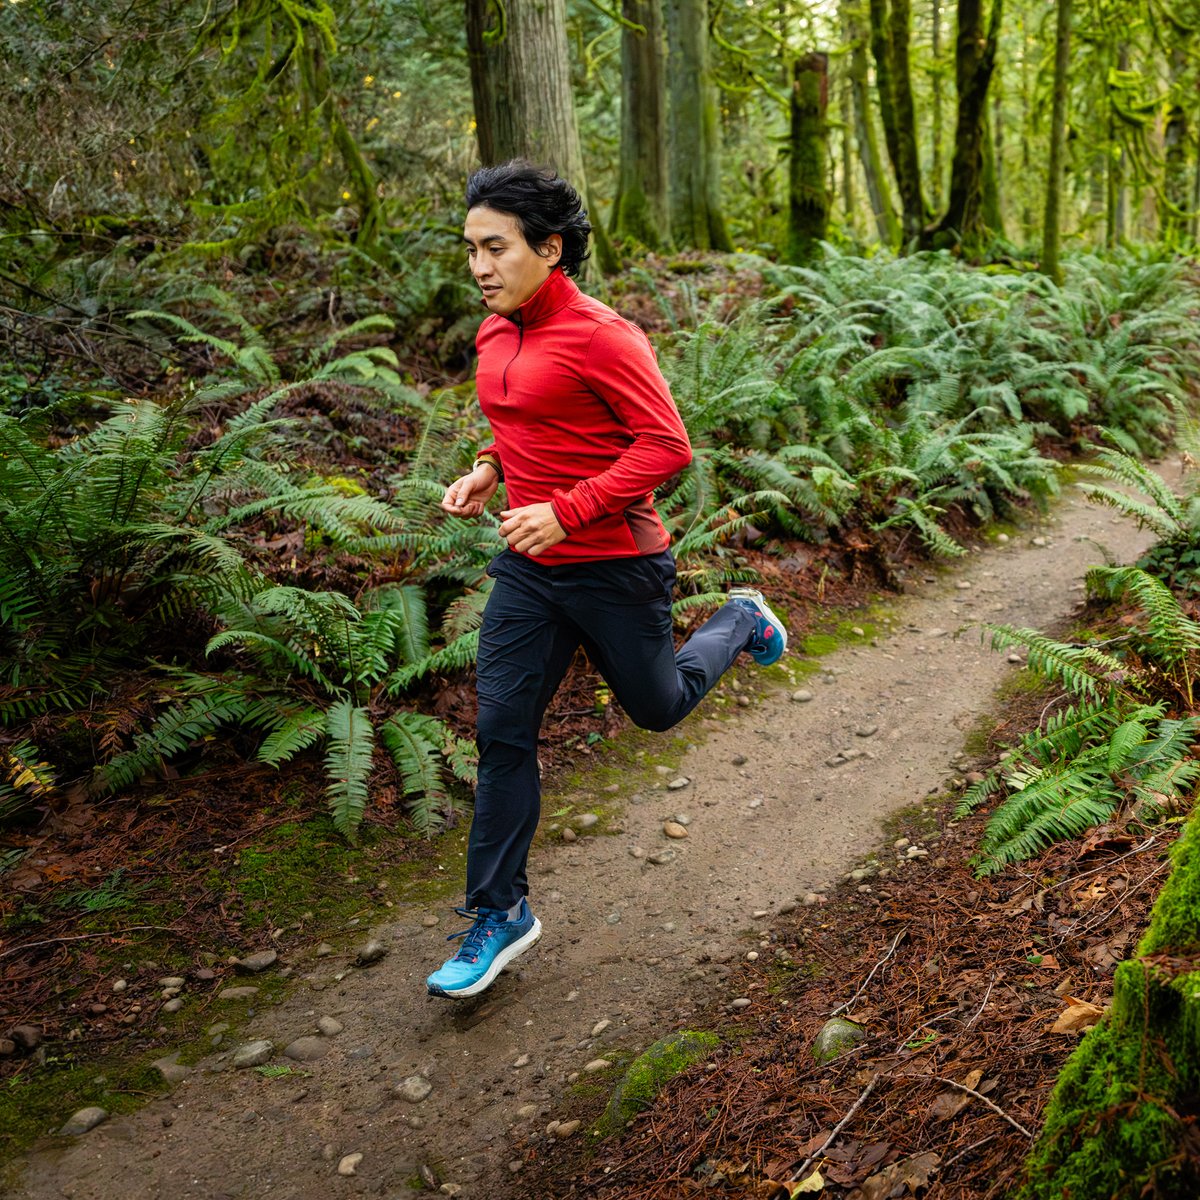 Sometimes when you're hitting the trails, you just want to cruise and take it easy. Get outside, enjoy the quiet and get some fresh air. When that feeling hits, lace up with MT-5. Learn more and shop. bit.ly/3HkyfNB